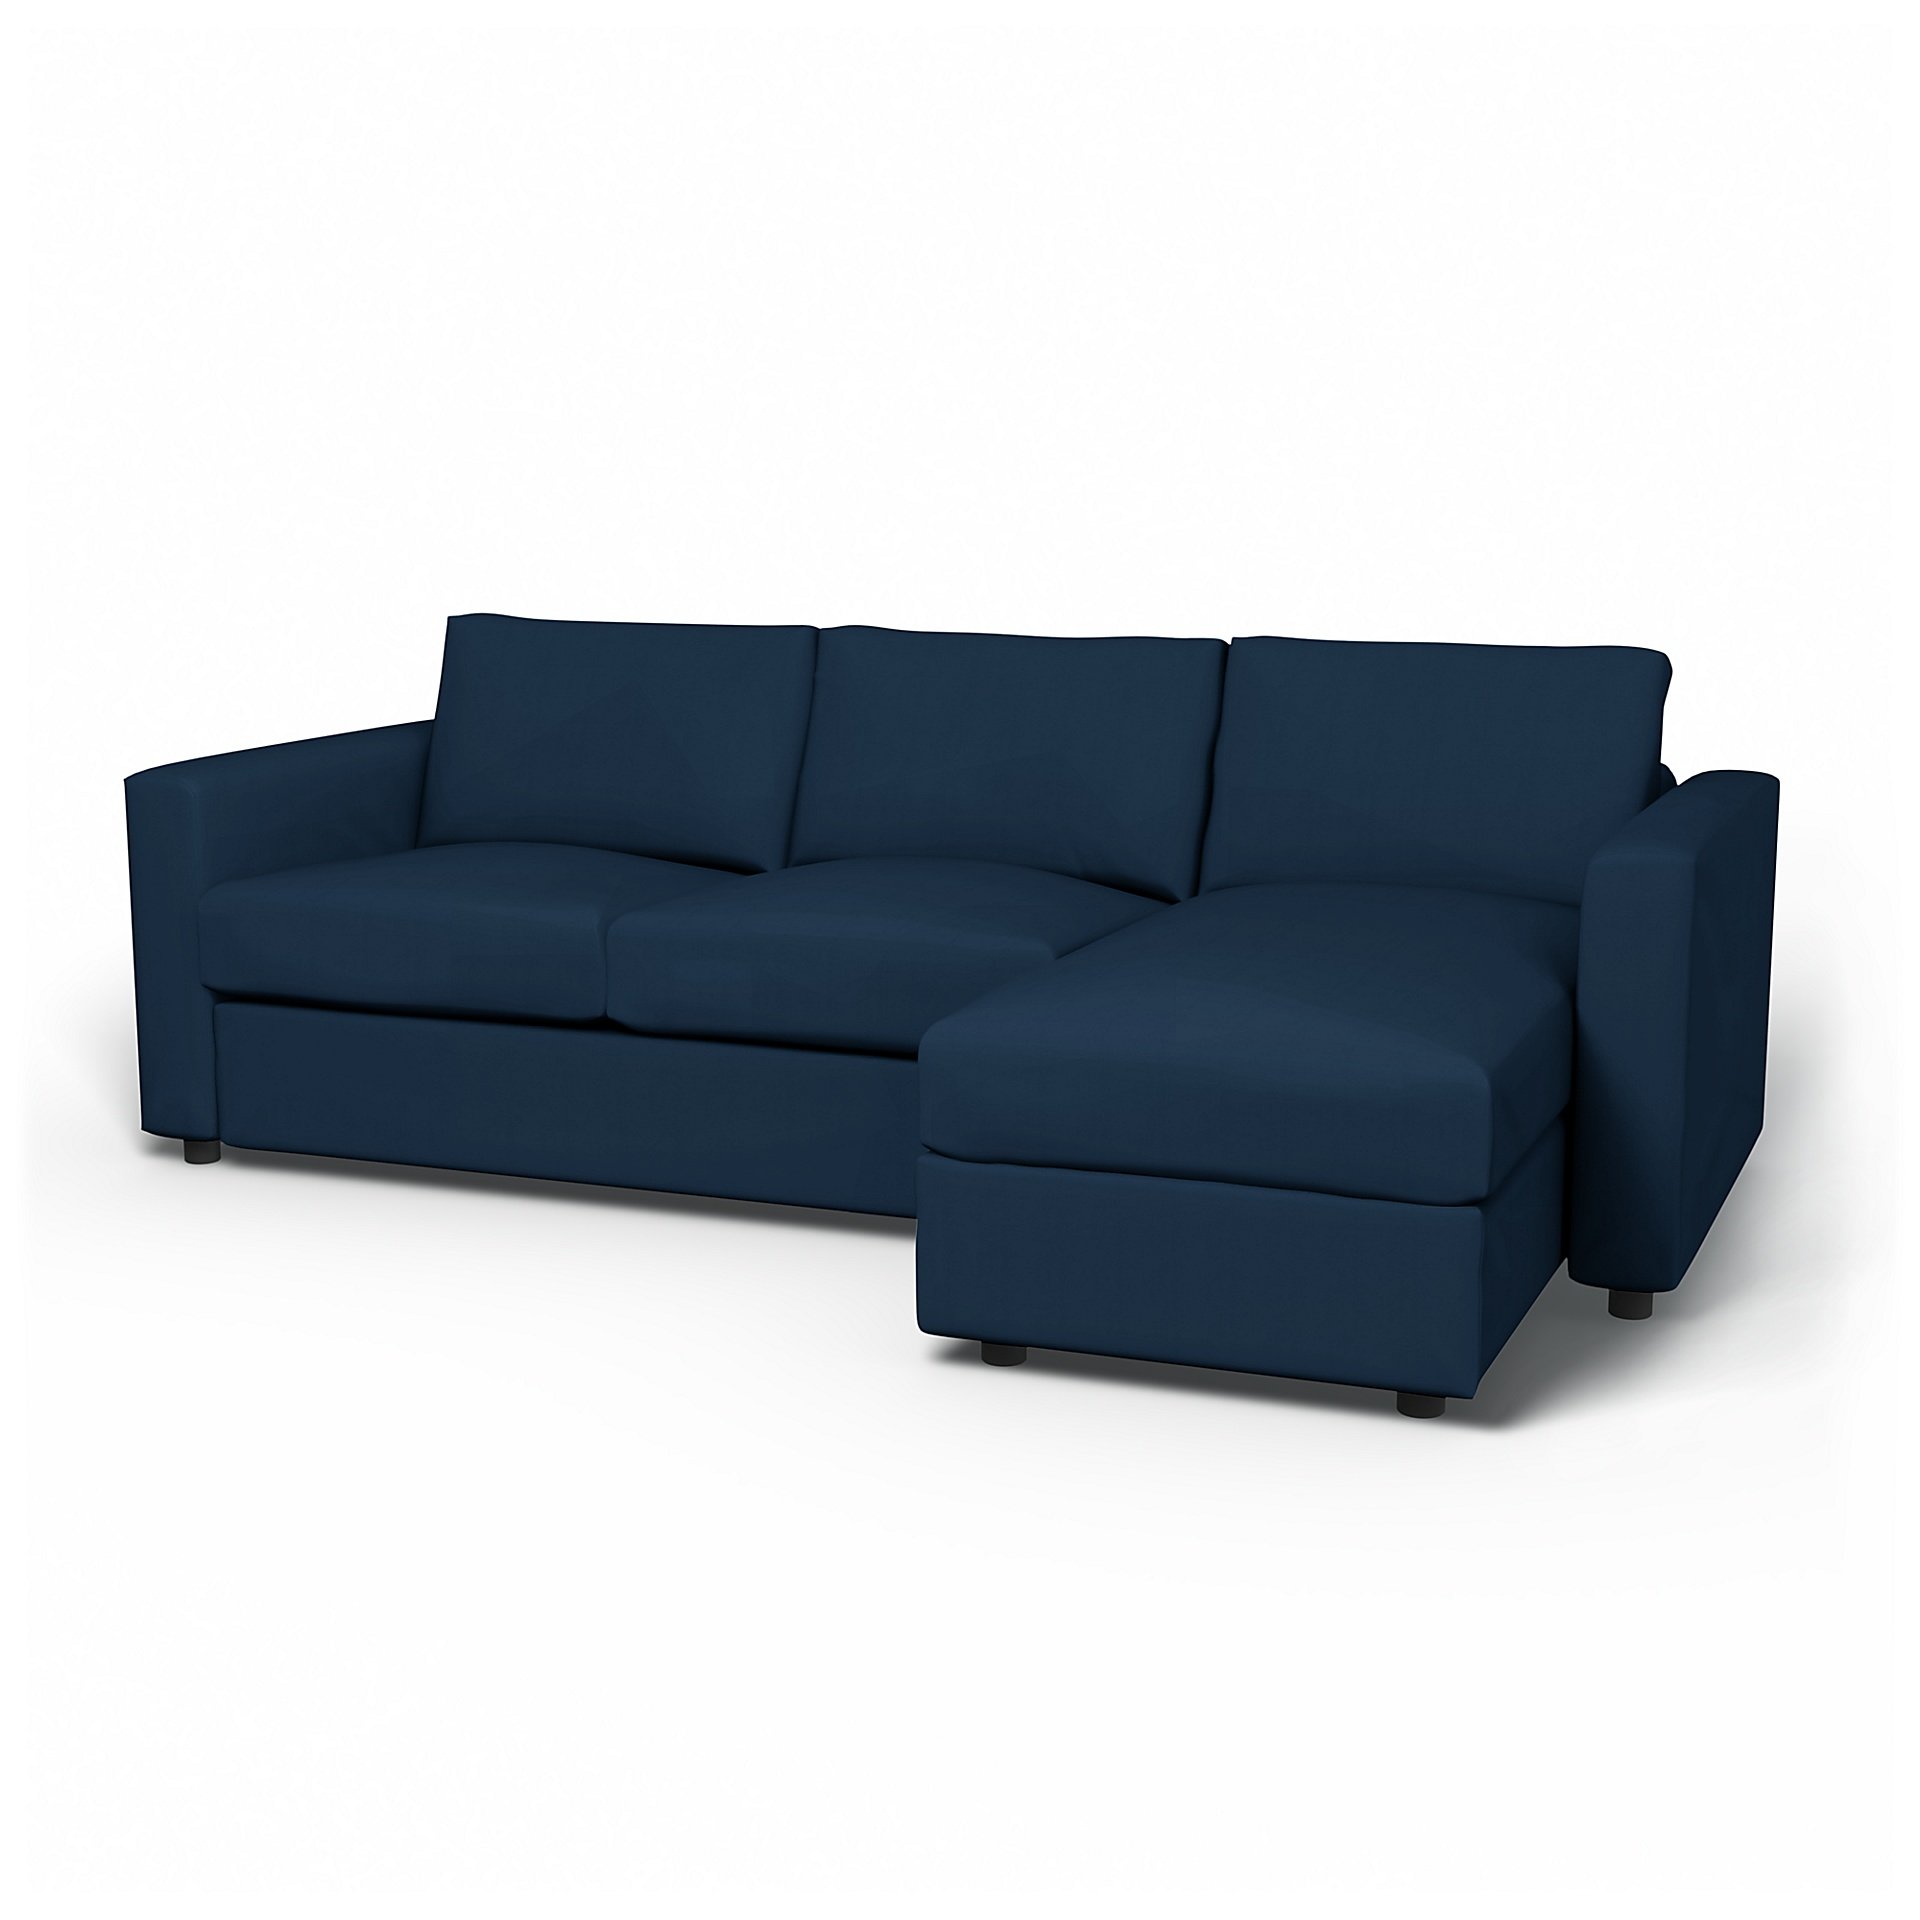 IKEA - Vimle 2 Seater Sofa with Chaise Cover, Deep Navy Blue, Cotton - Bemz